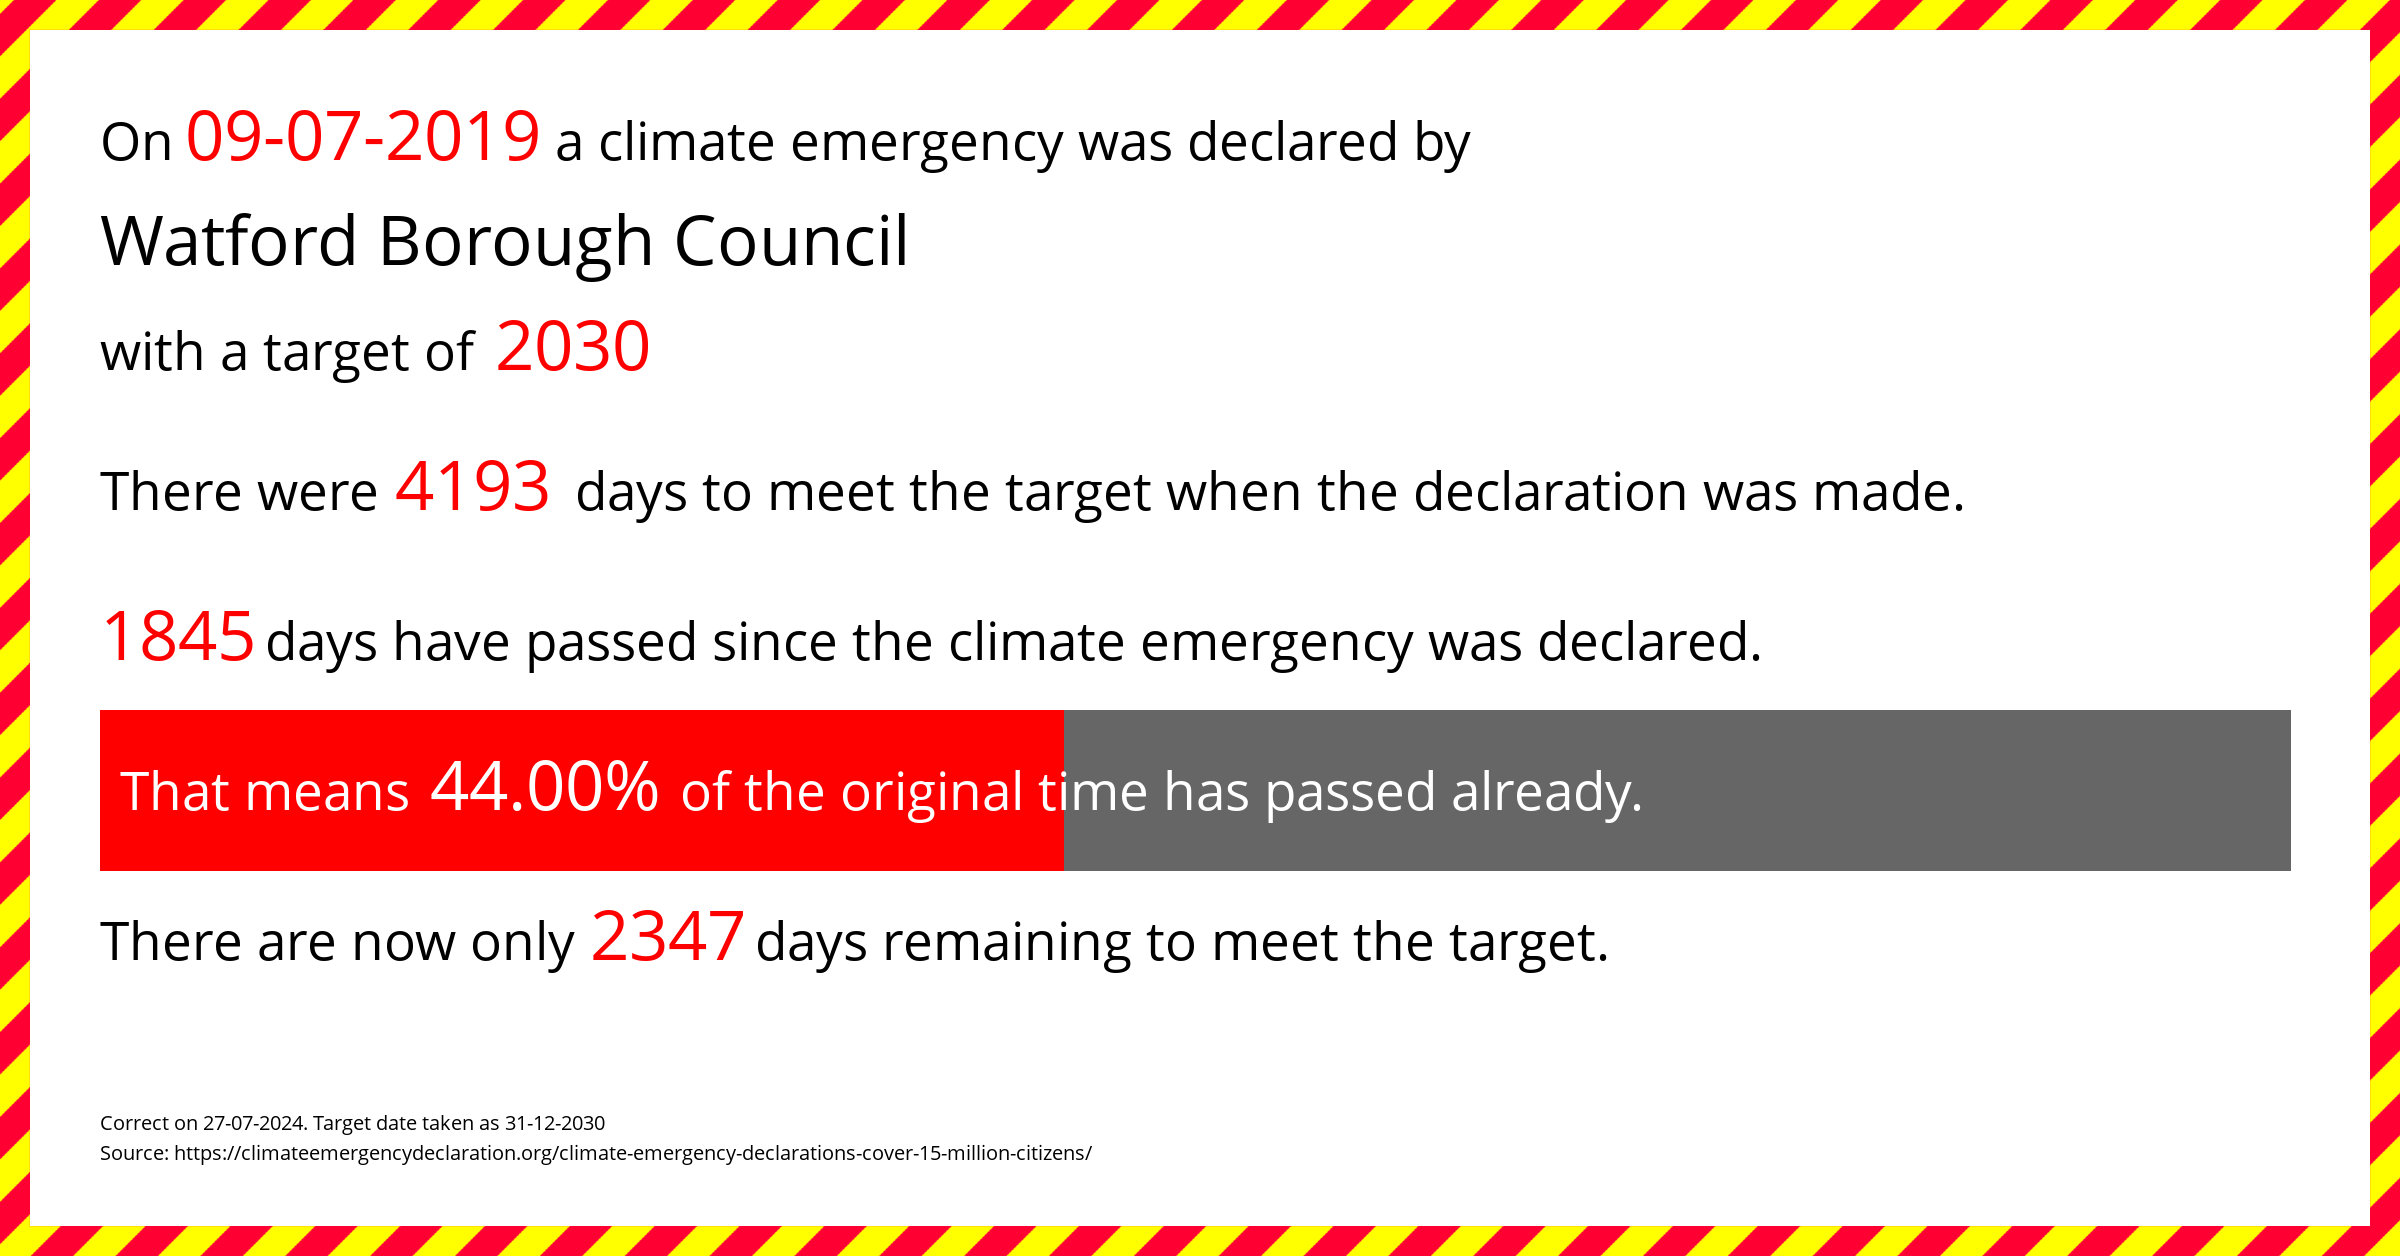 Watford Borough Council declared a Climate emergency on Tuesday 9th July 2019, with a target of 2030.